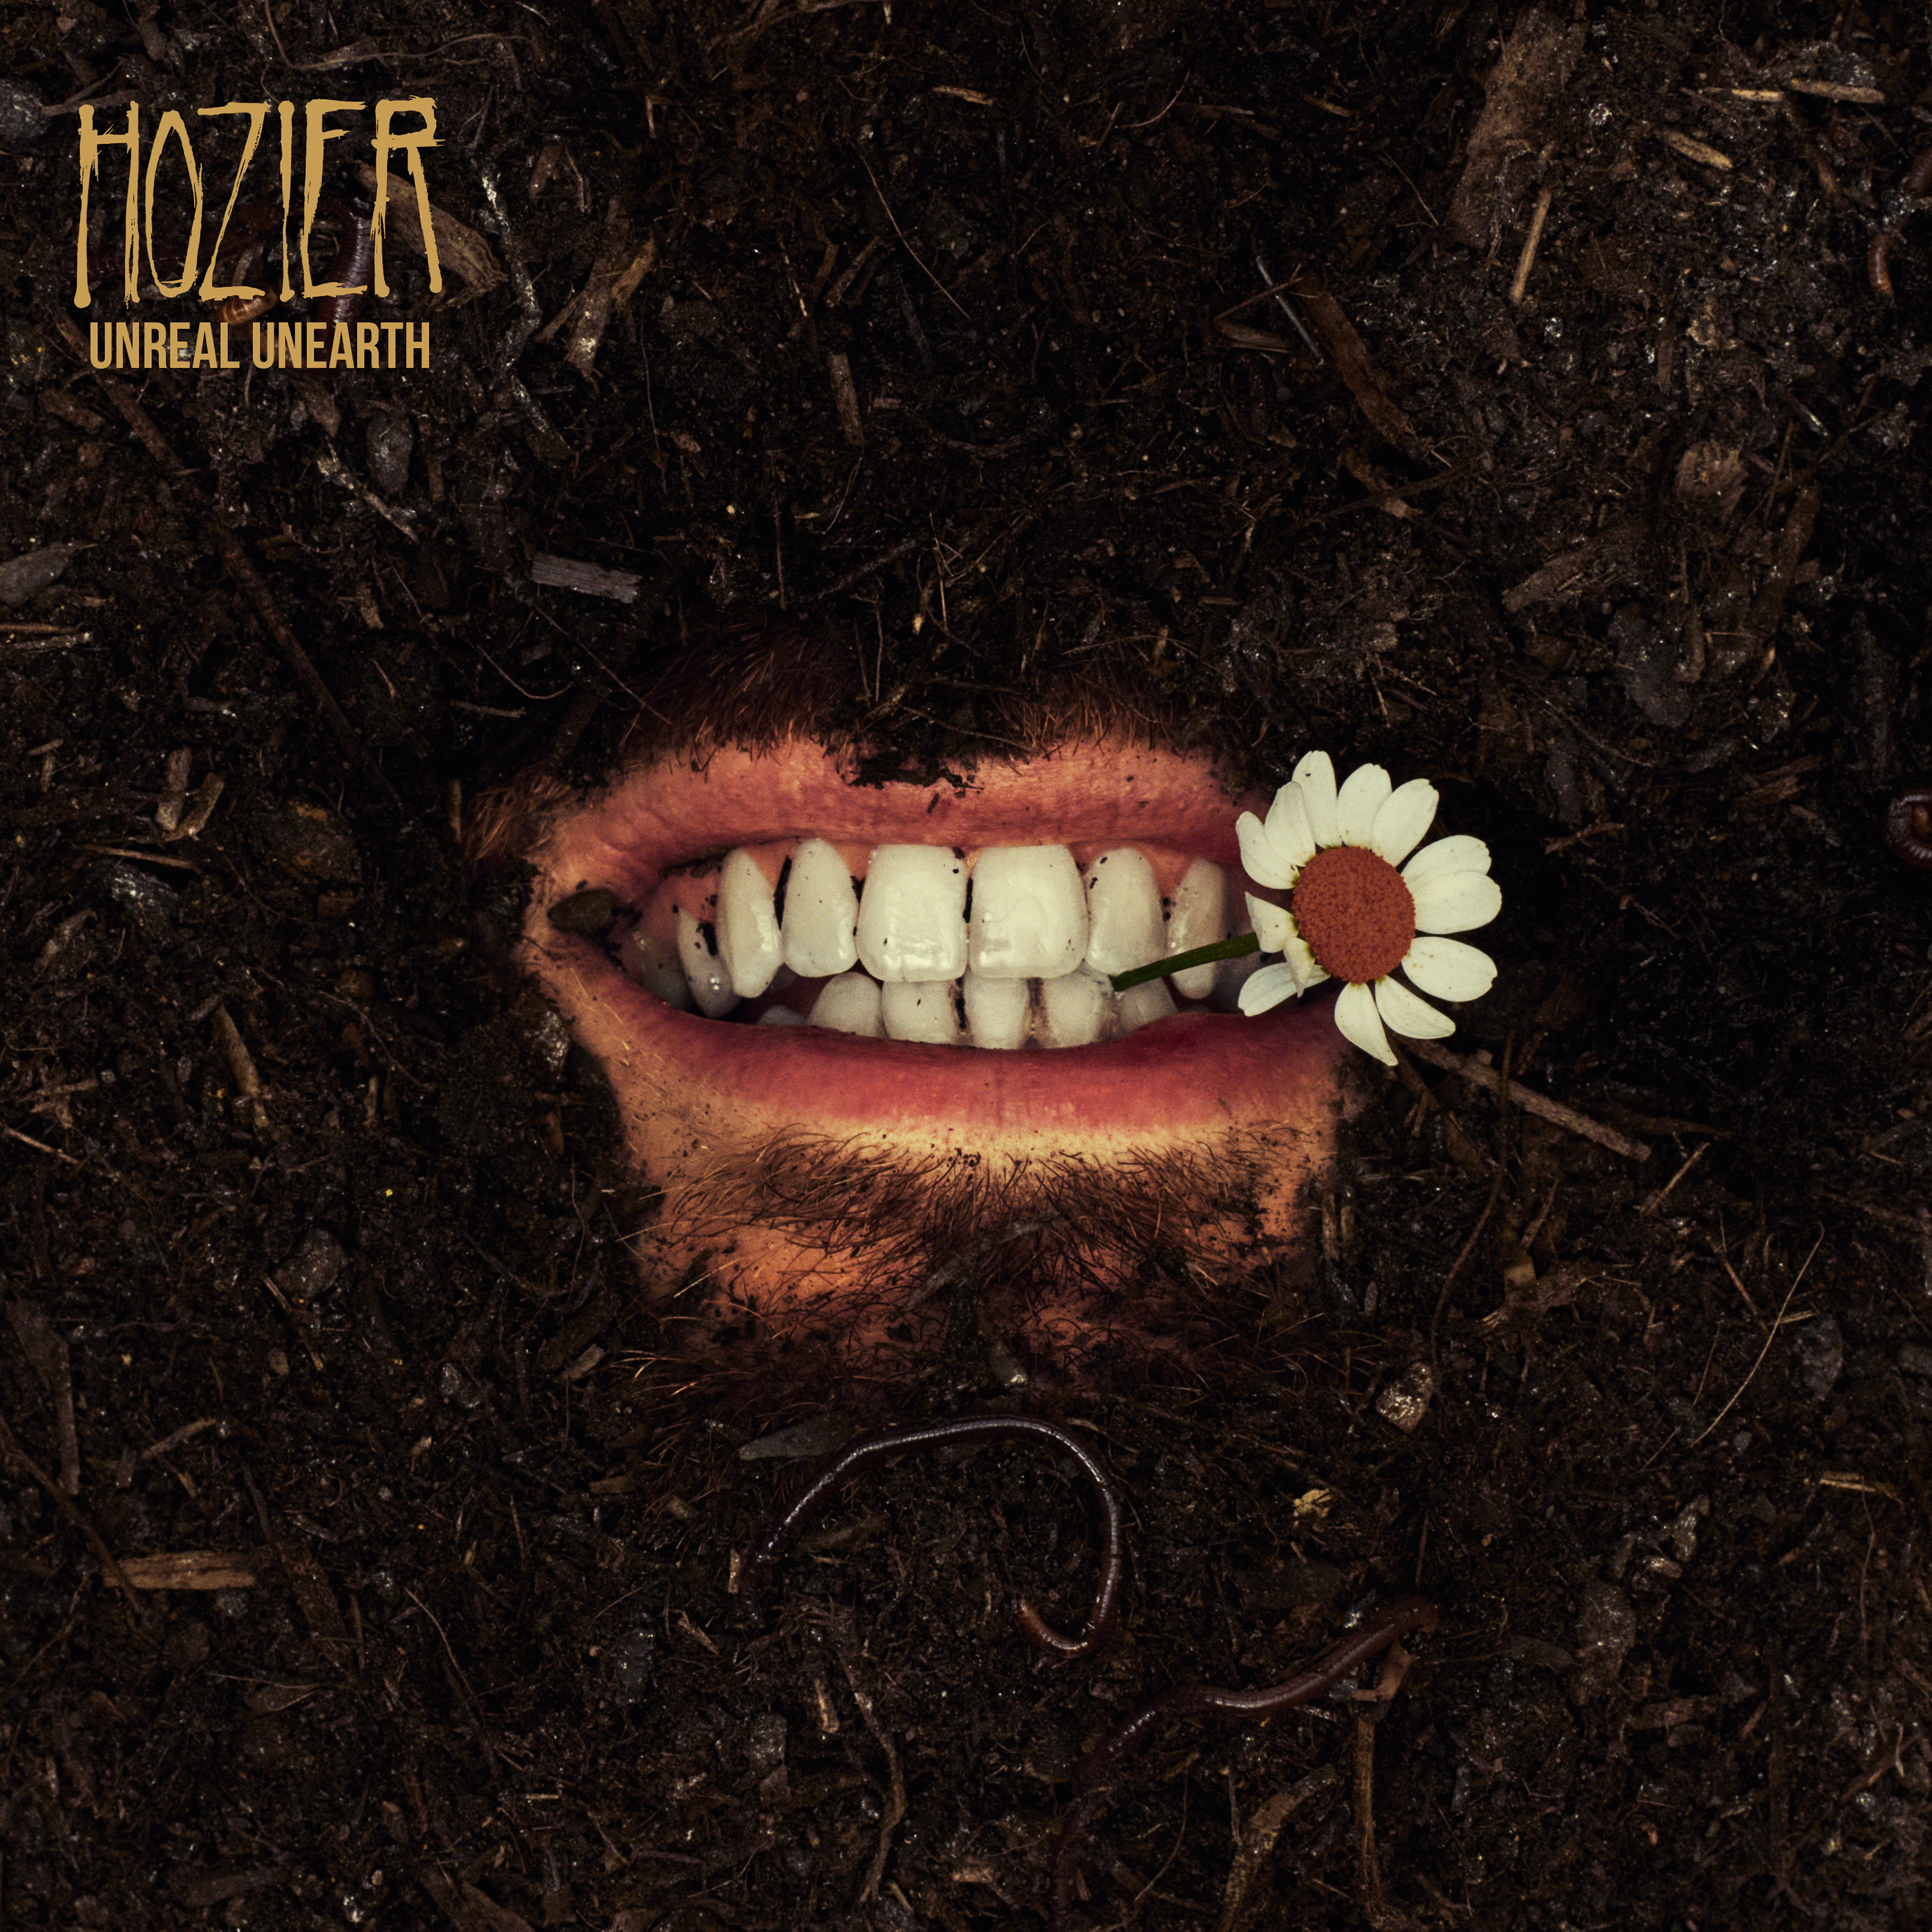 Hozier — All Things End cover artwork